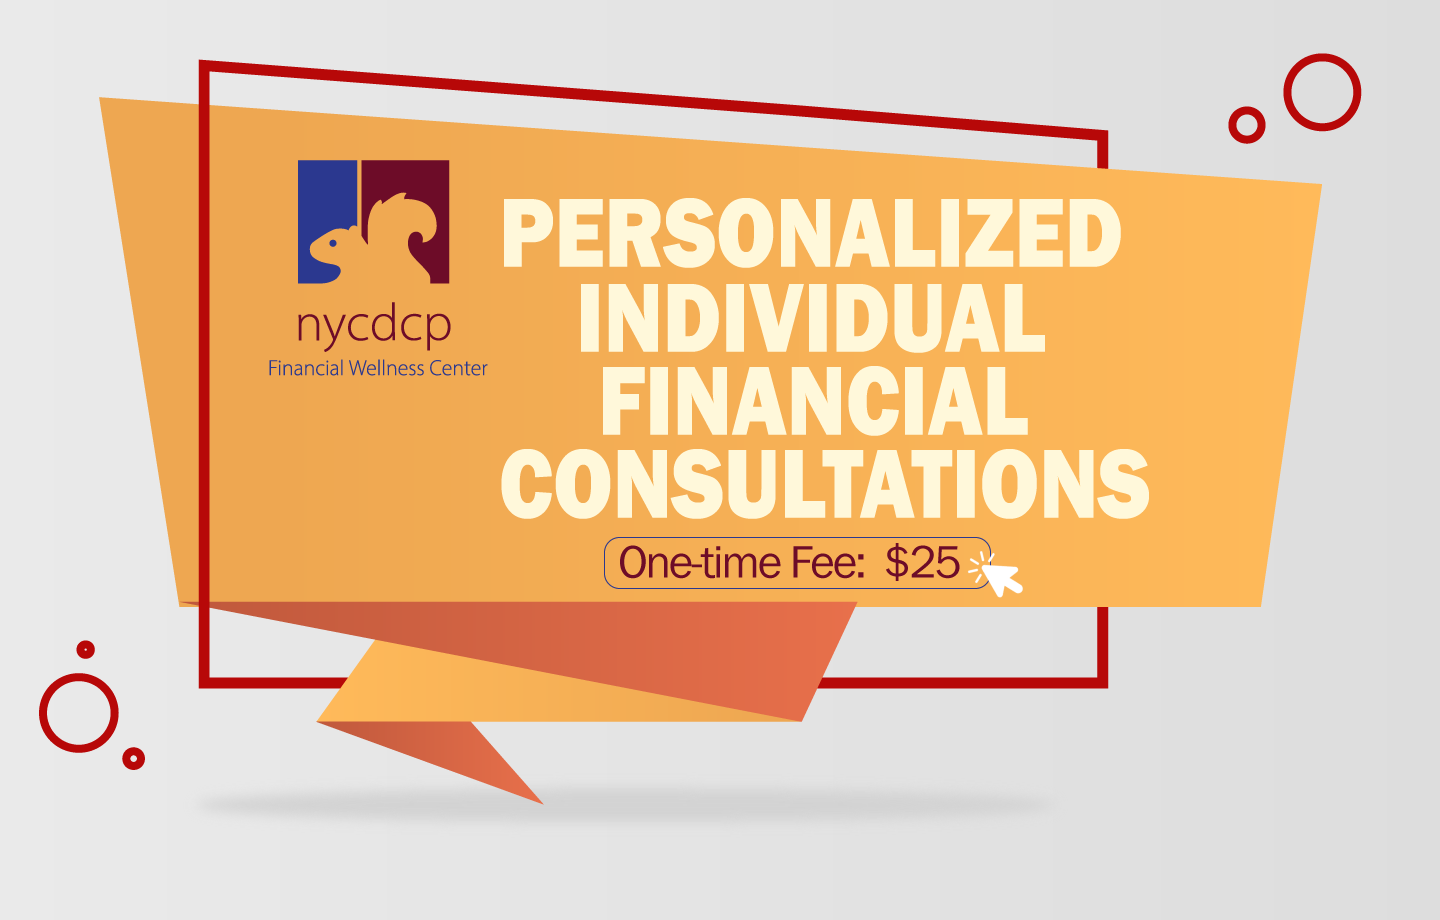 Personalized Individual Financial Consultations
                                           